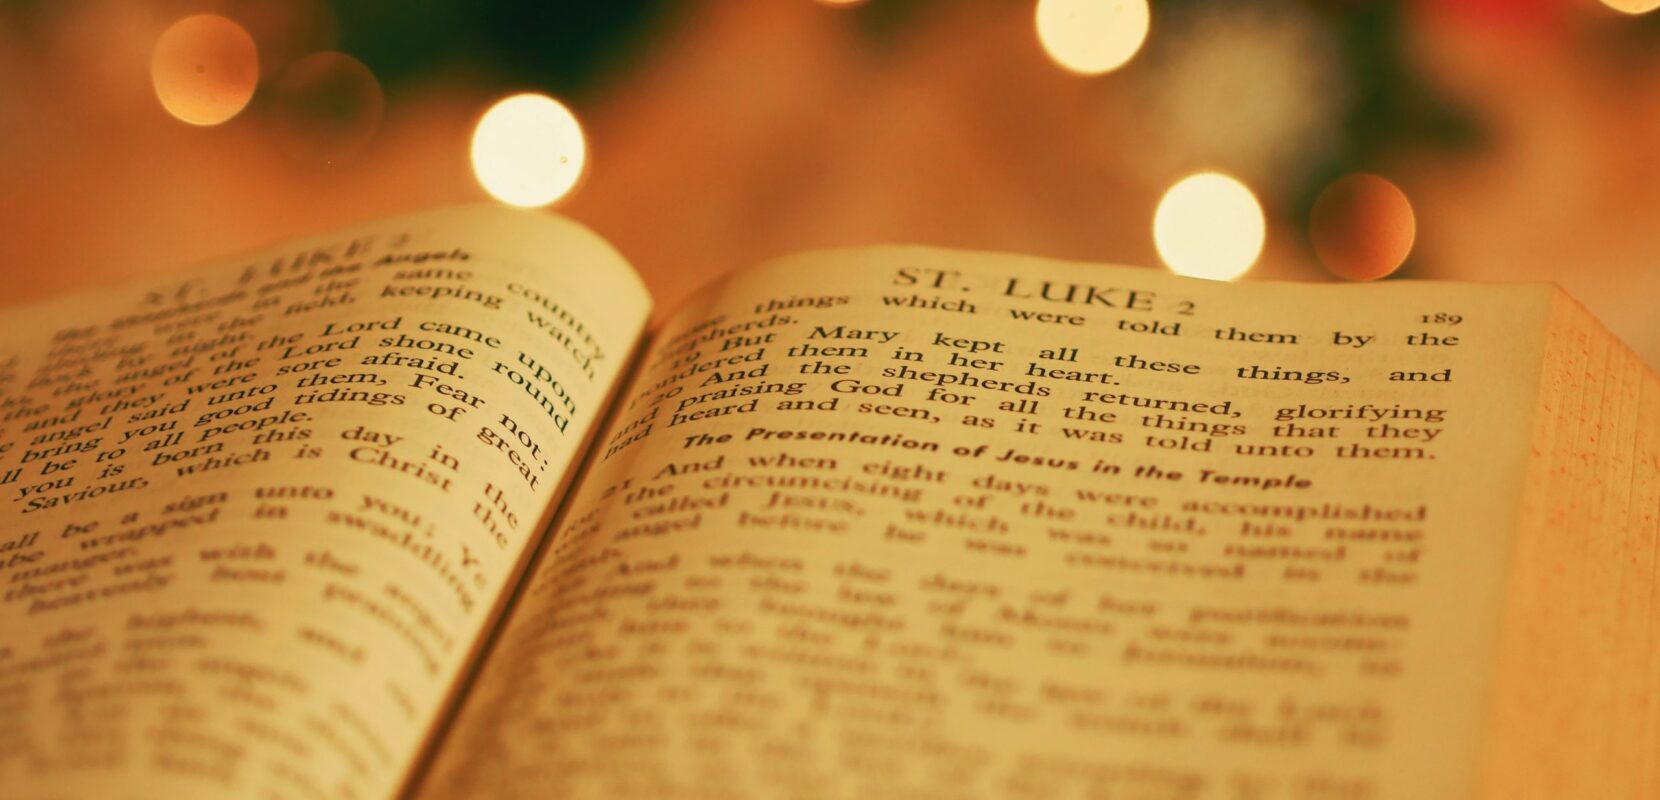 the bible open to luke 2 which talks about advent and living with expectation